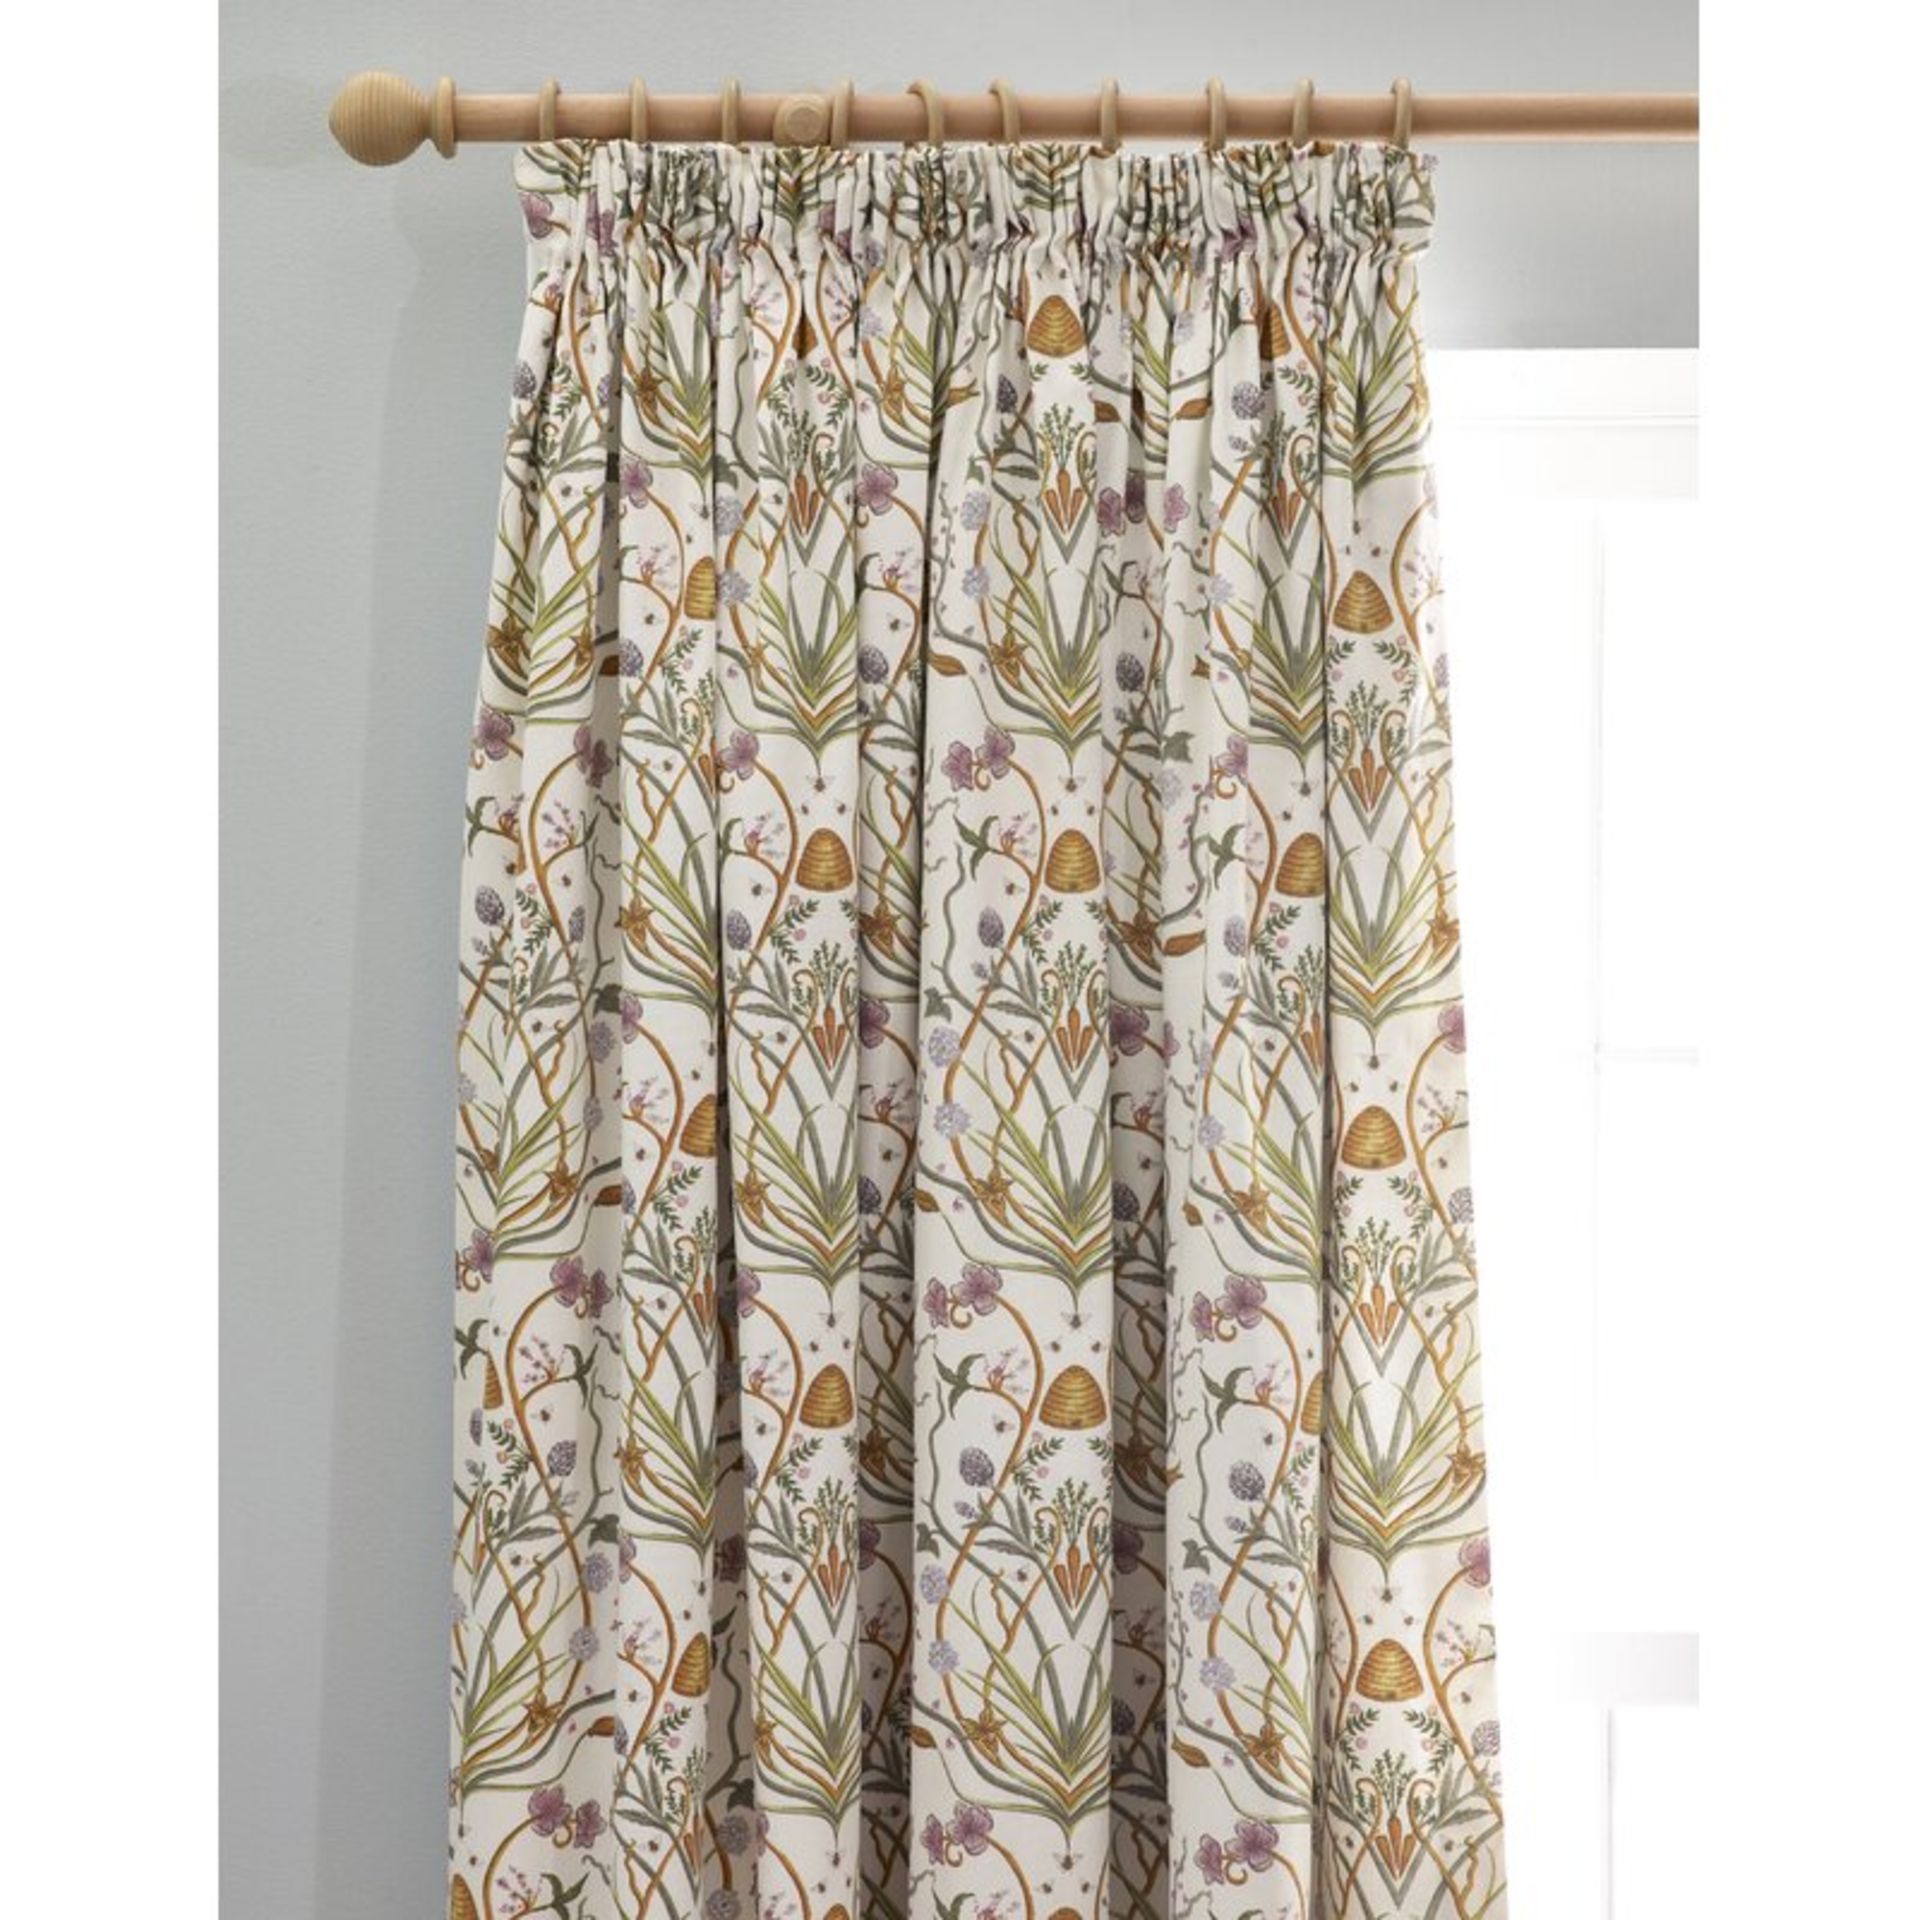 Potagerie Pencil Pleat Room Darkening Curtains - RRP £77.99 - Image 2 of 2